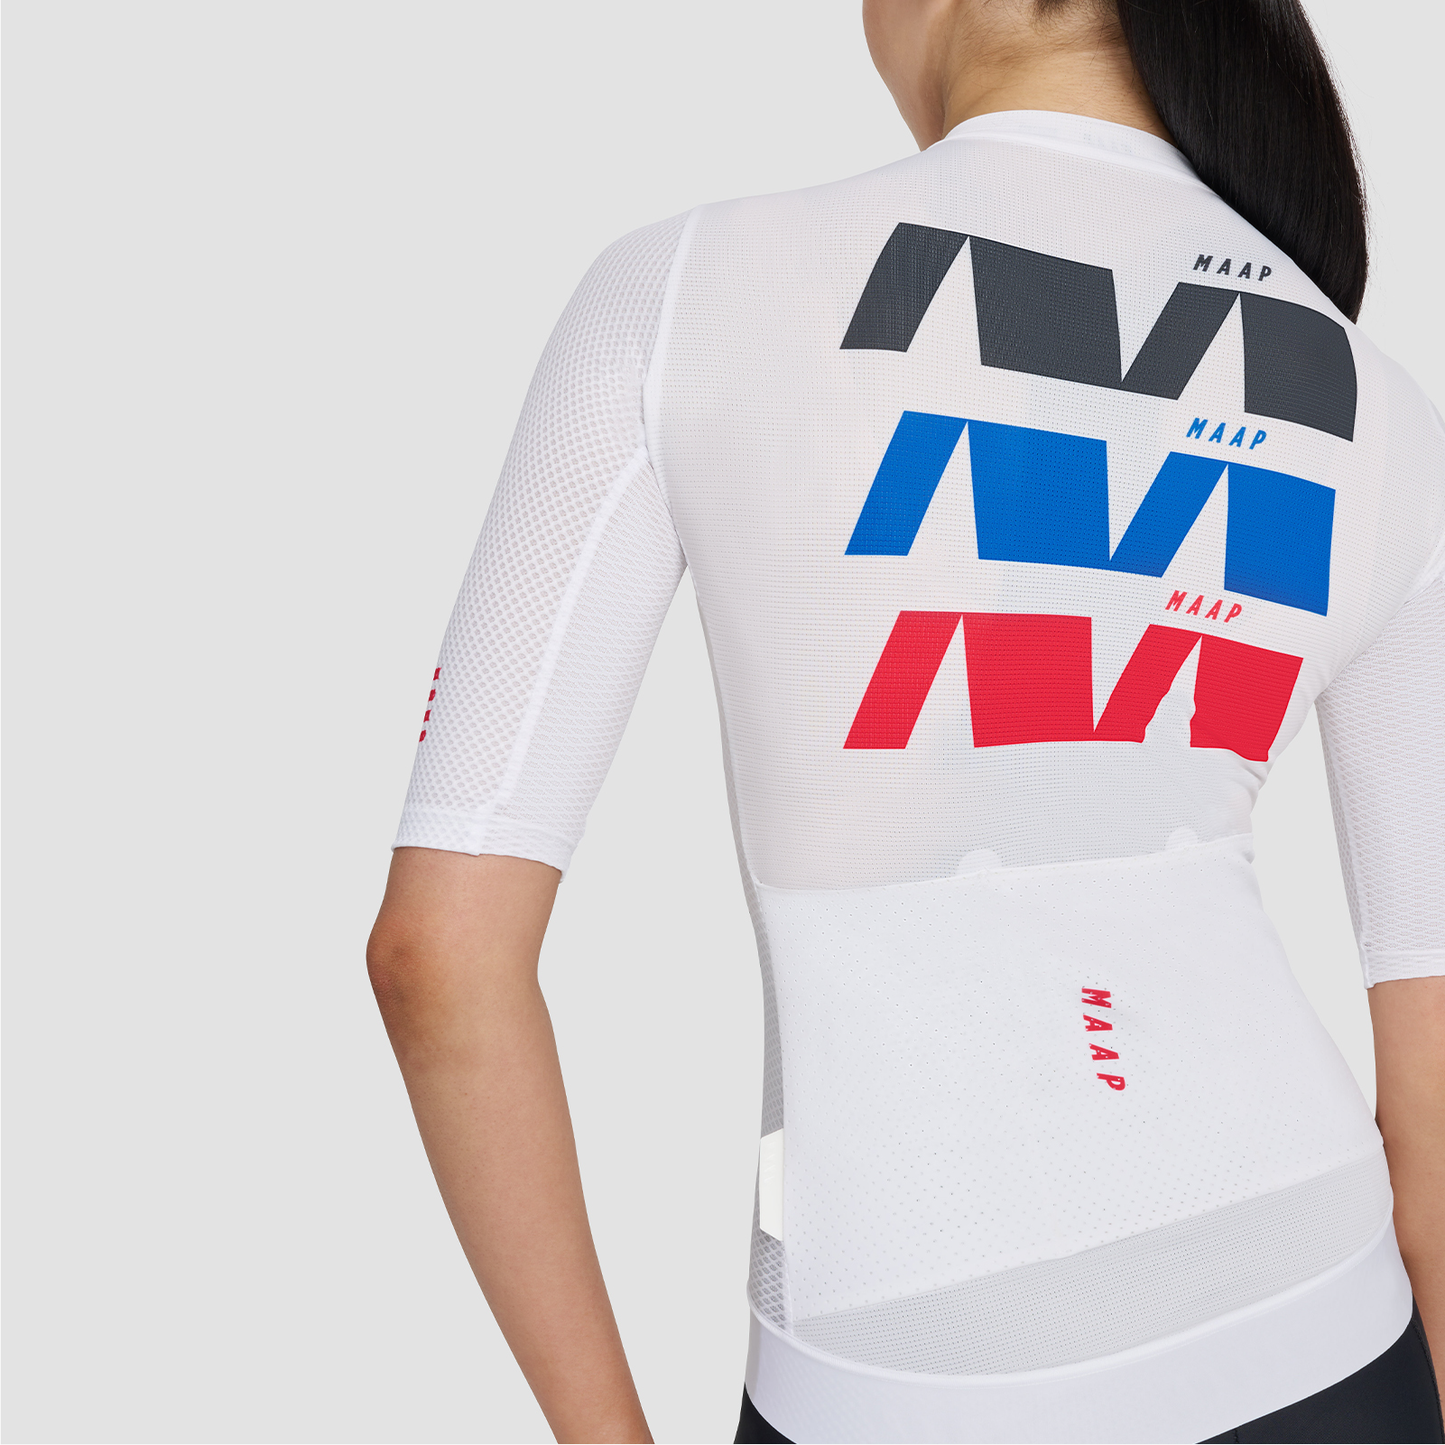 Women's Trace Pro Air Jersey White